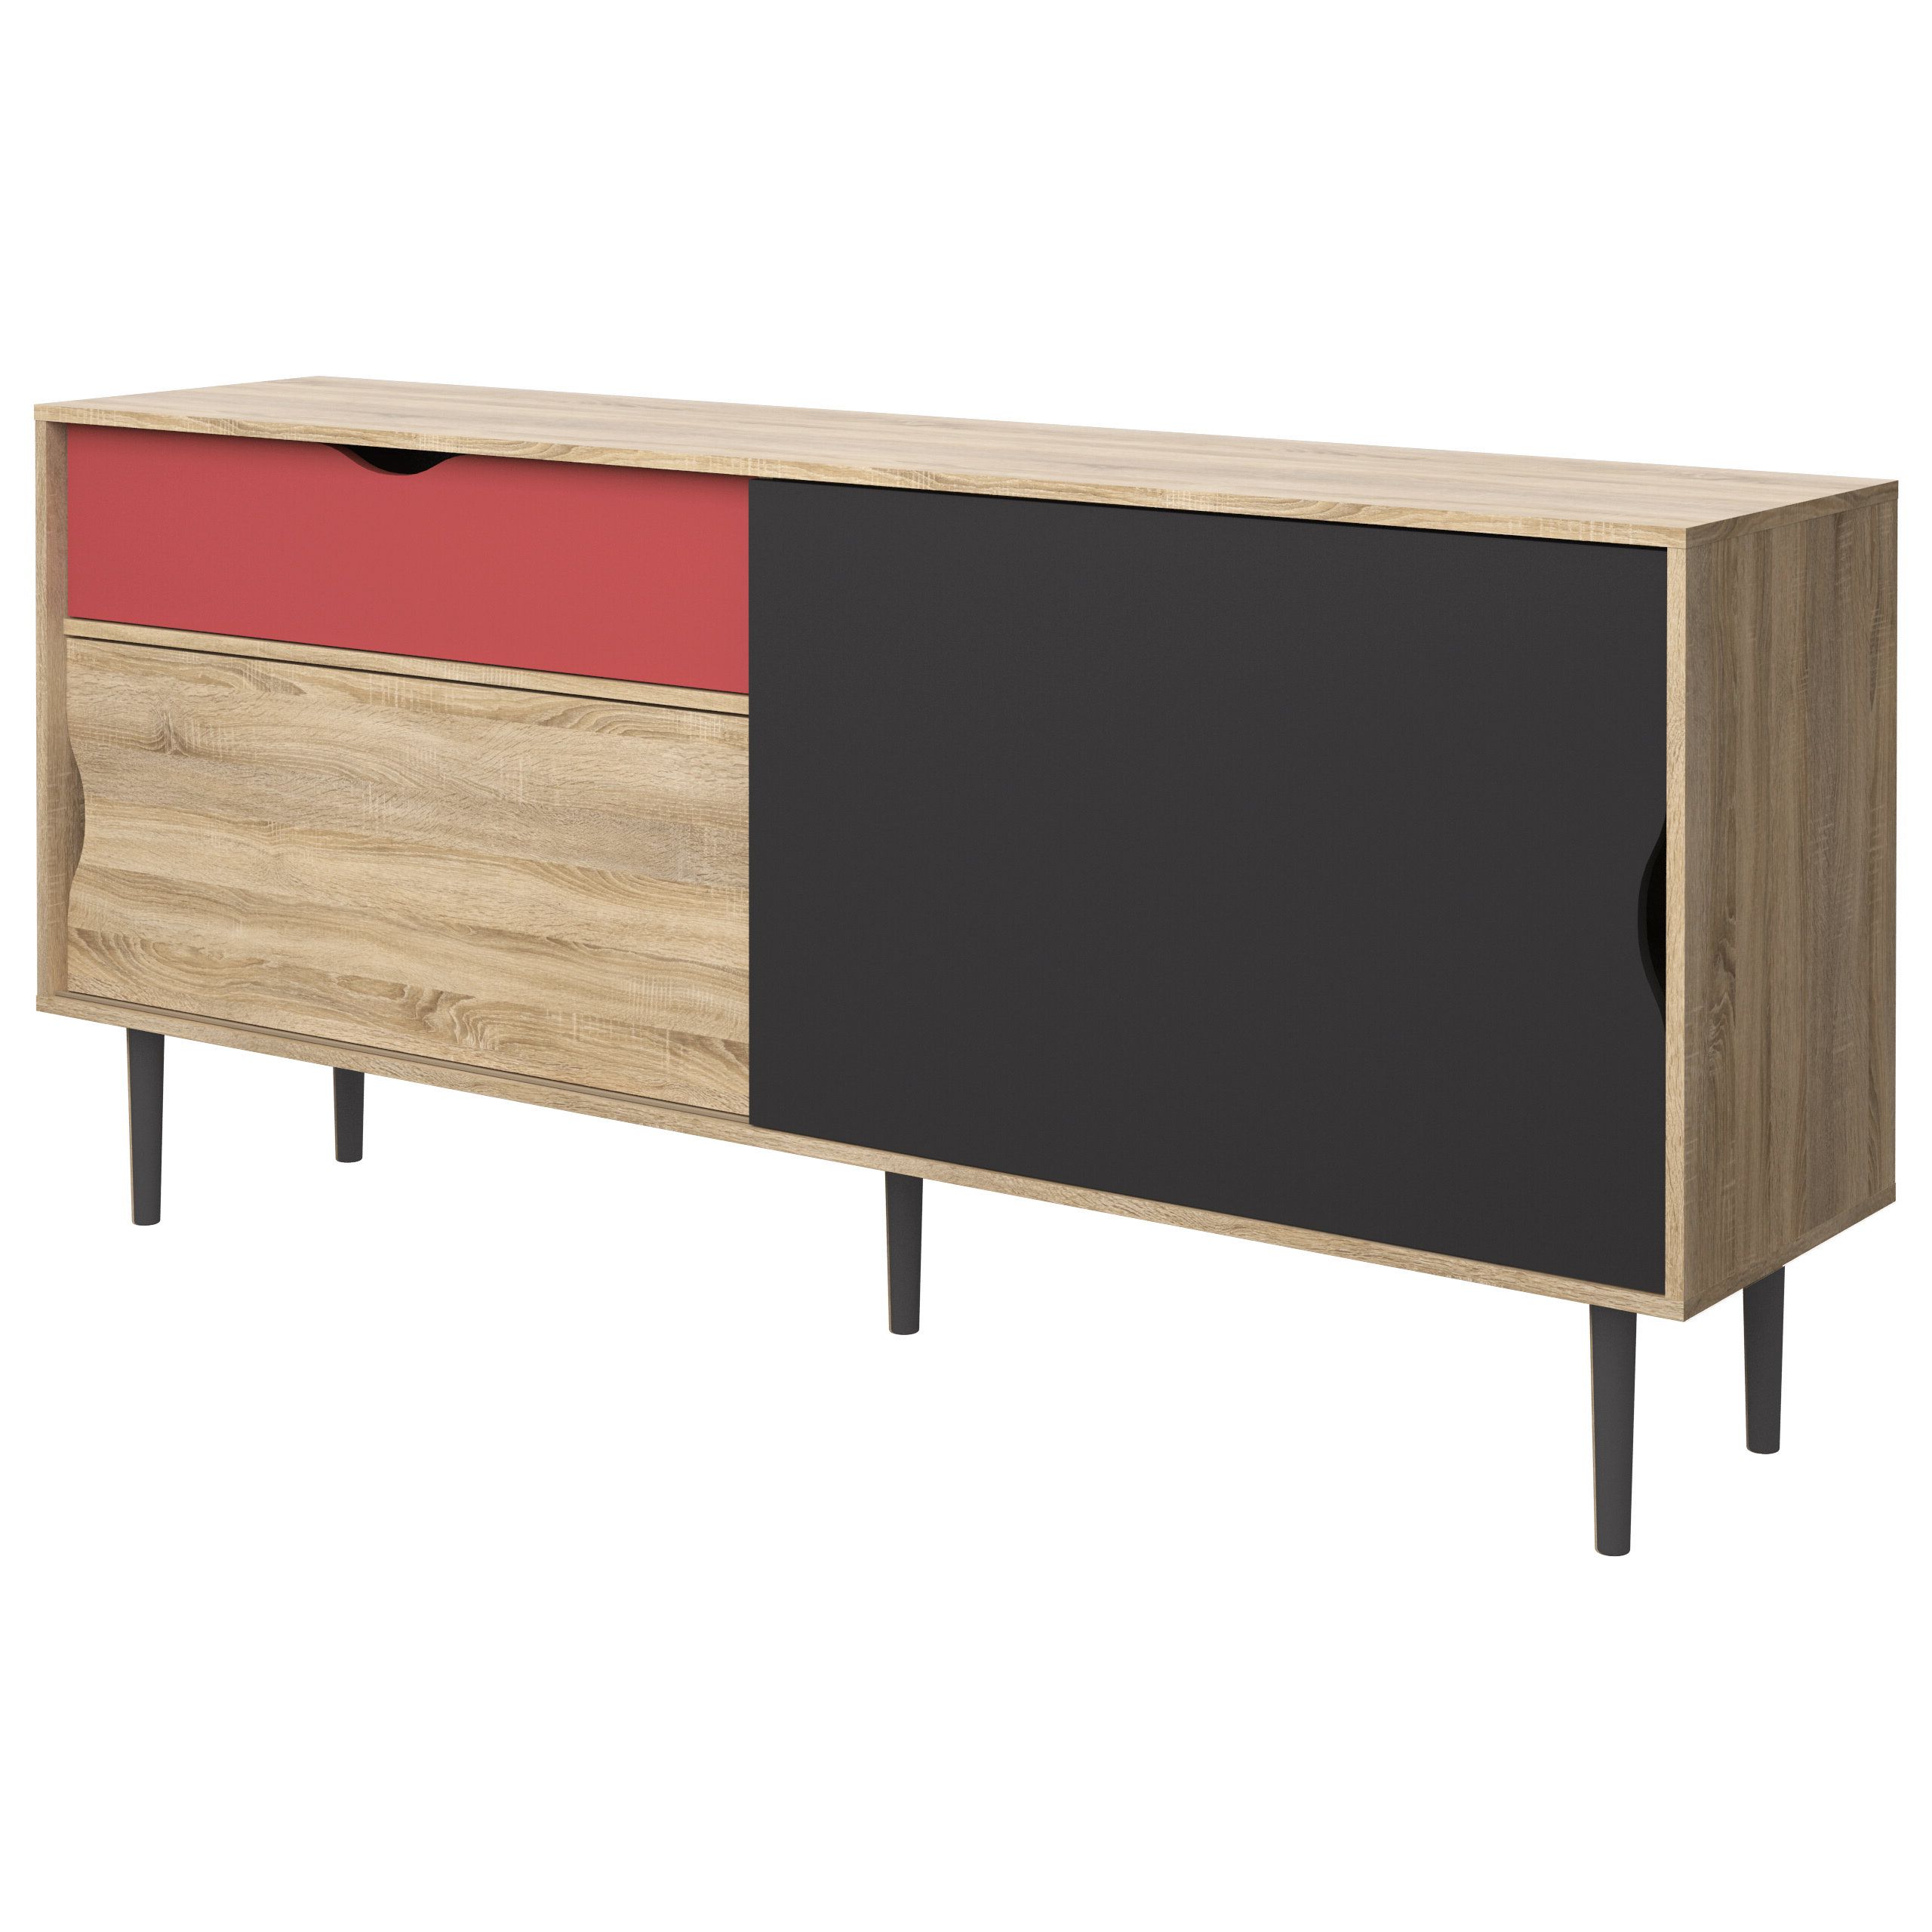 Dovray Sideboard Regarding Dovray Sideboards (Gallery 2 of 20)